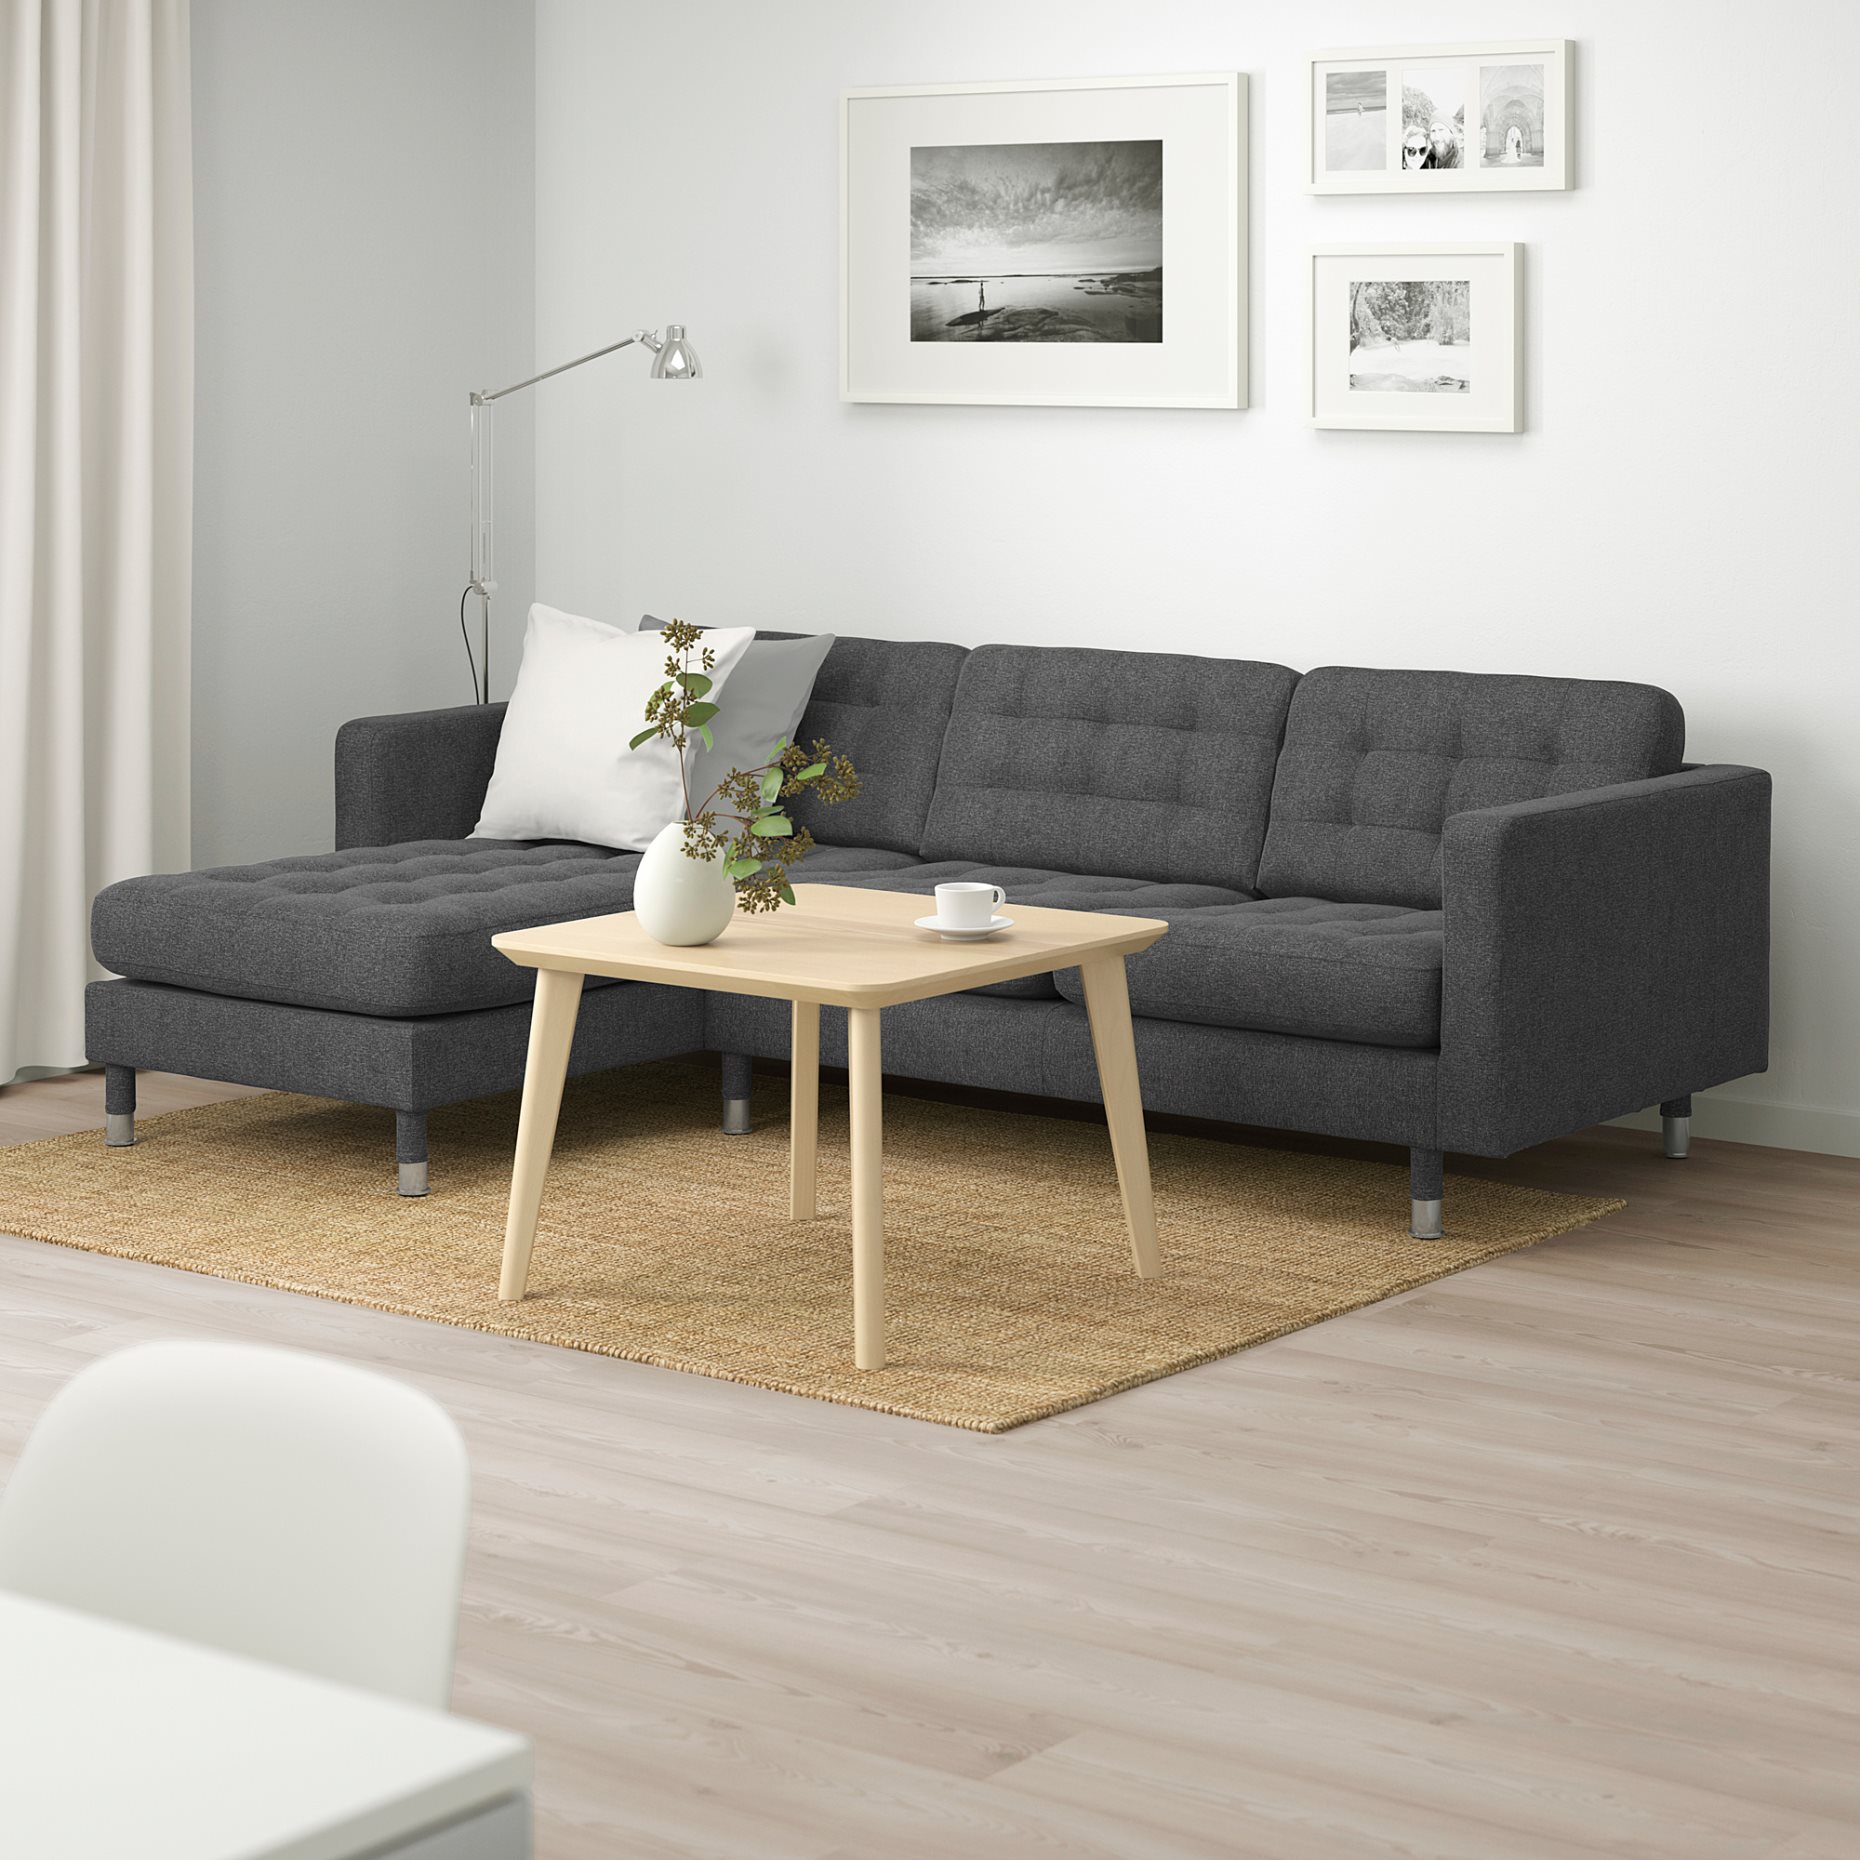 LANDSKRONA, 3-seat sofa with chaise longue, 892.726.67